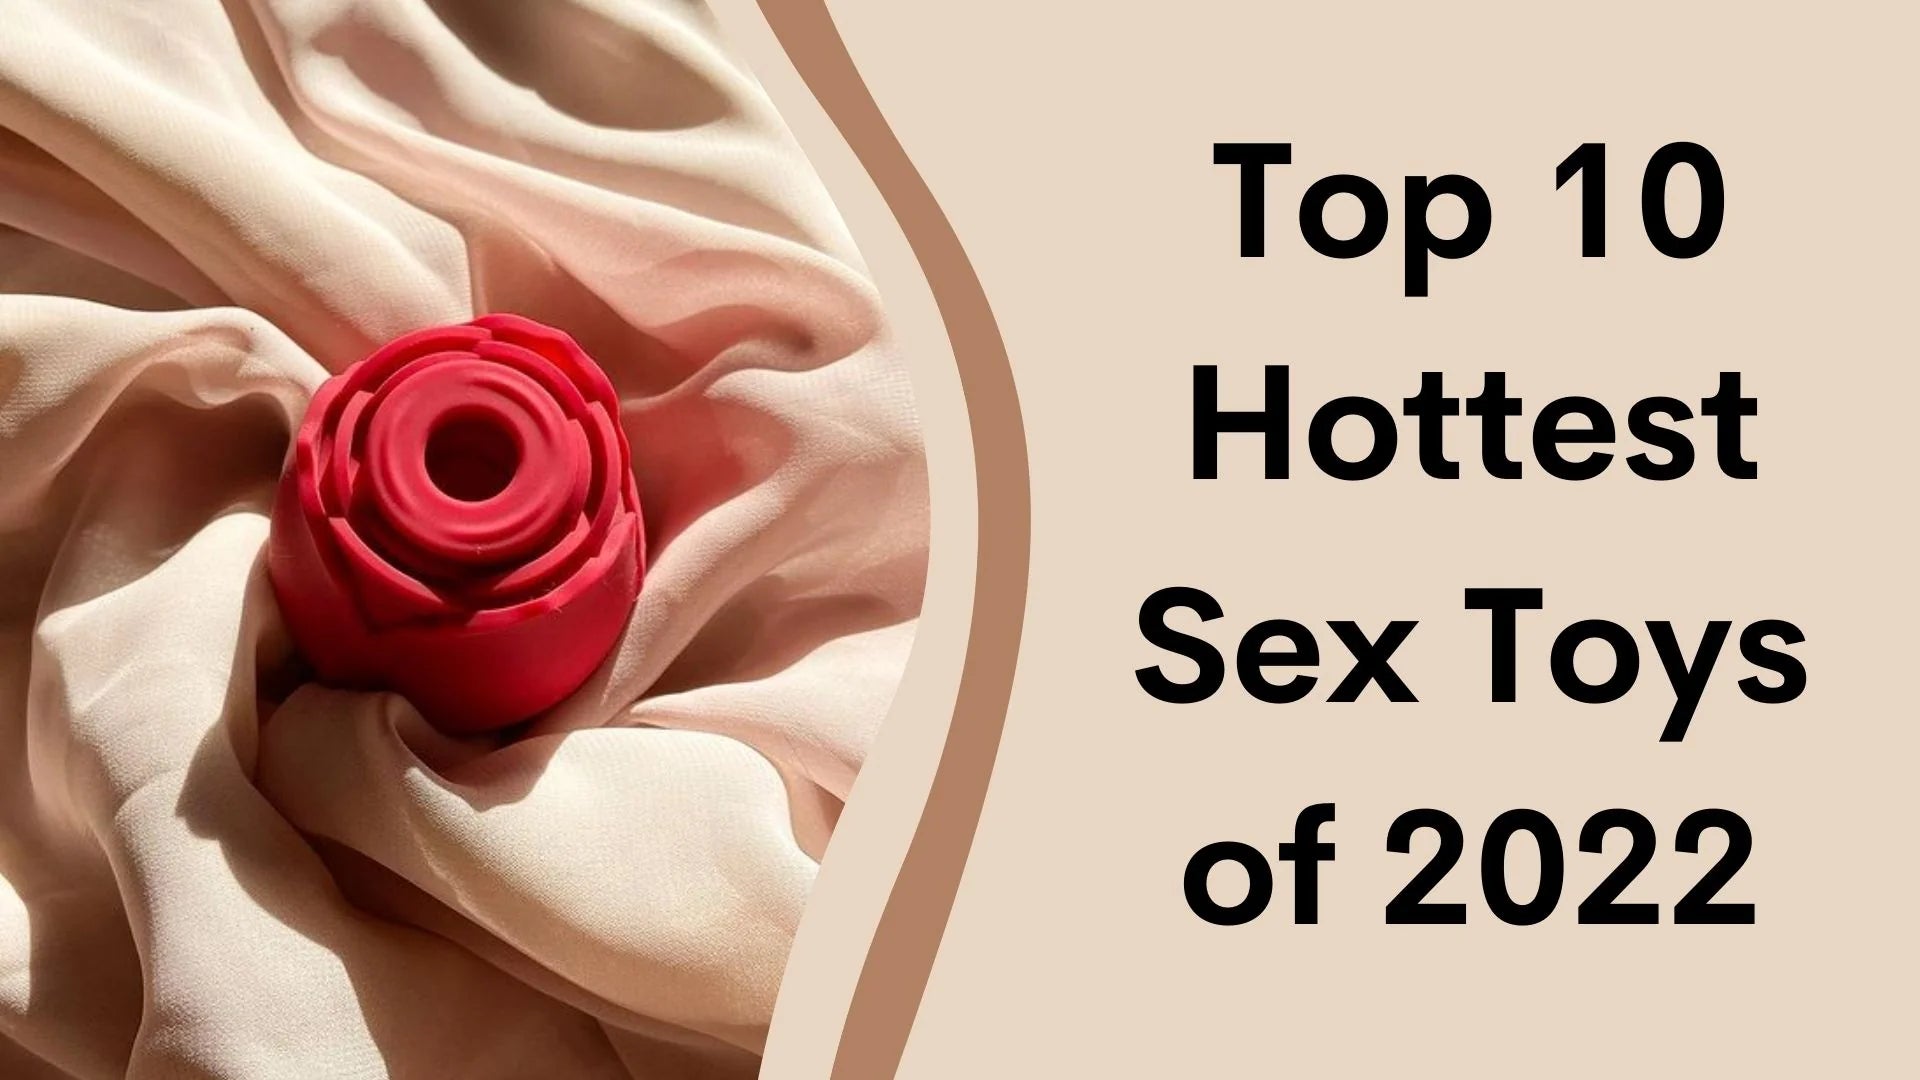 The Top 10 Hottest Sex Toys of 2022